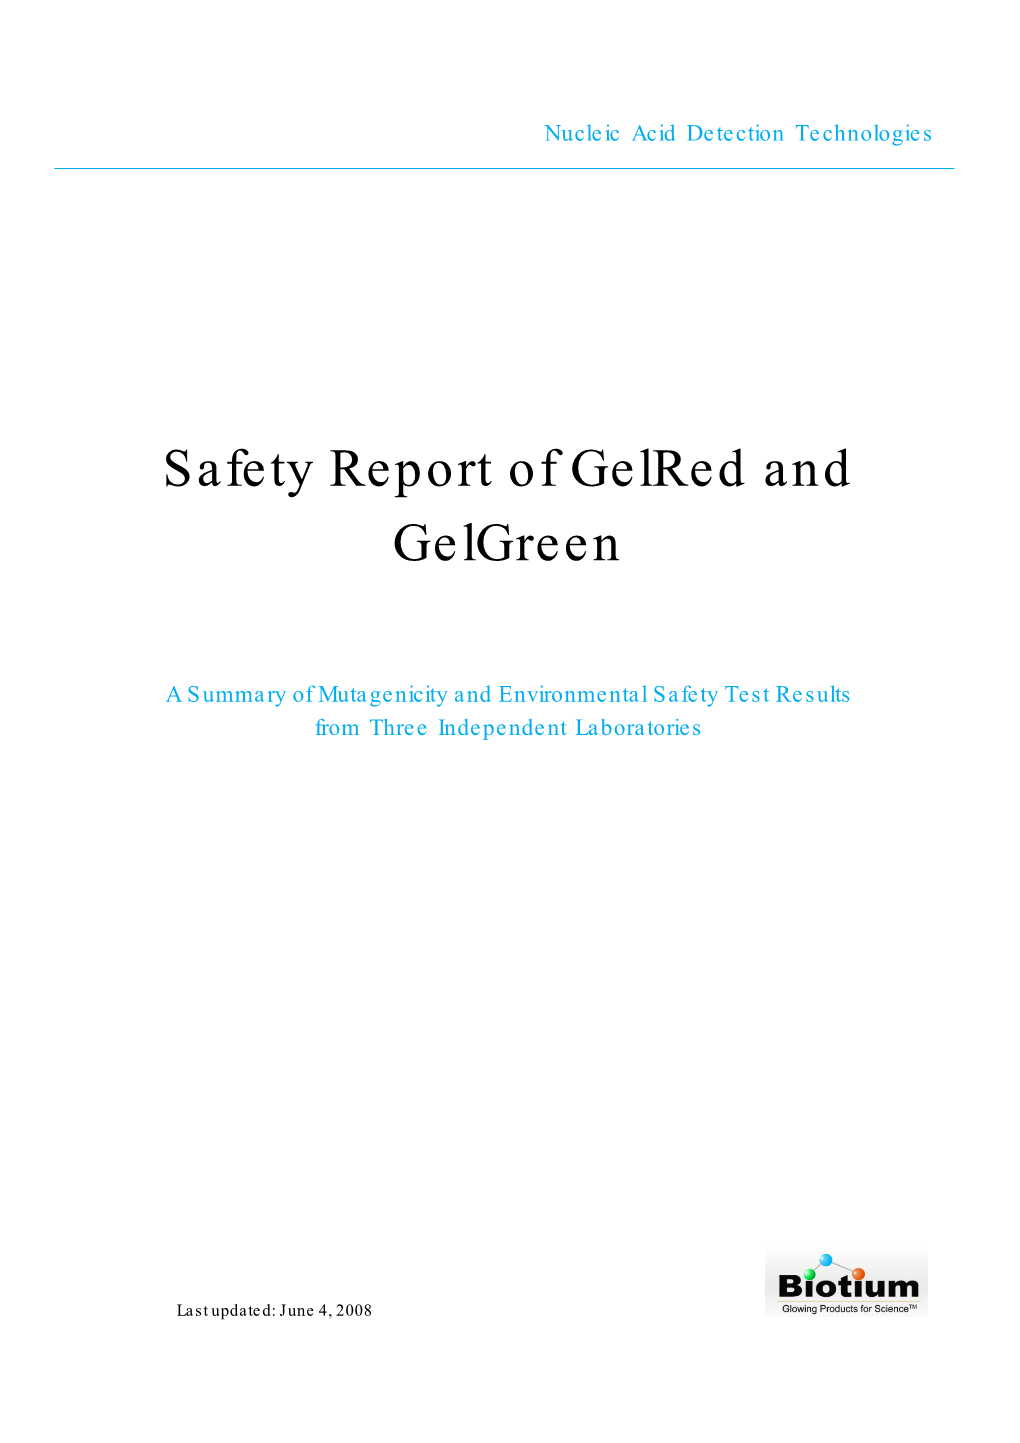 Safety Report of Gelred and Gelgreen